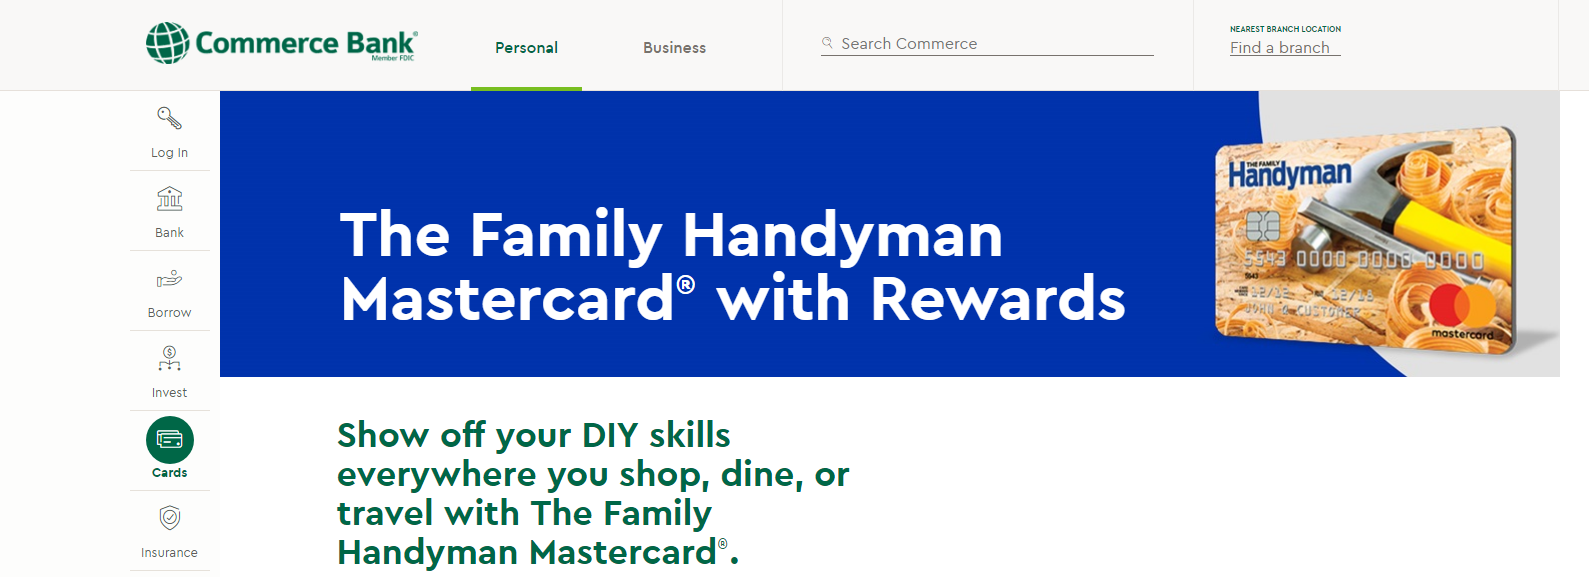 log in to your family handyman mastercardxx with rewards account